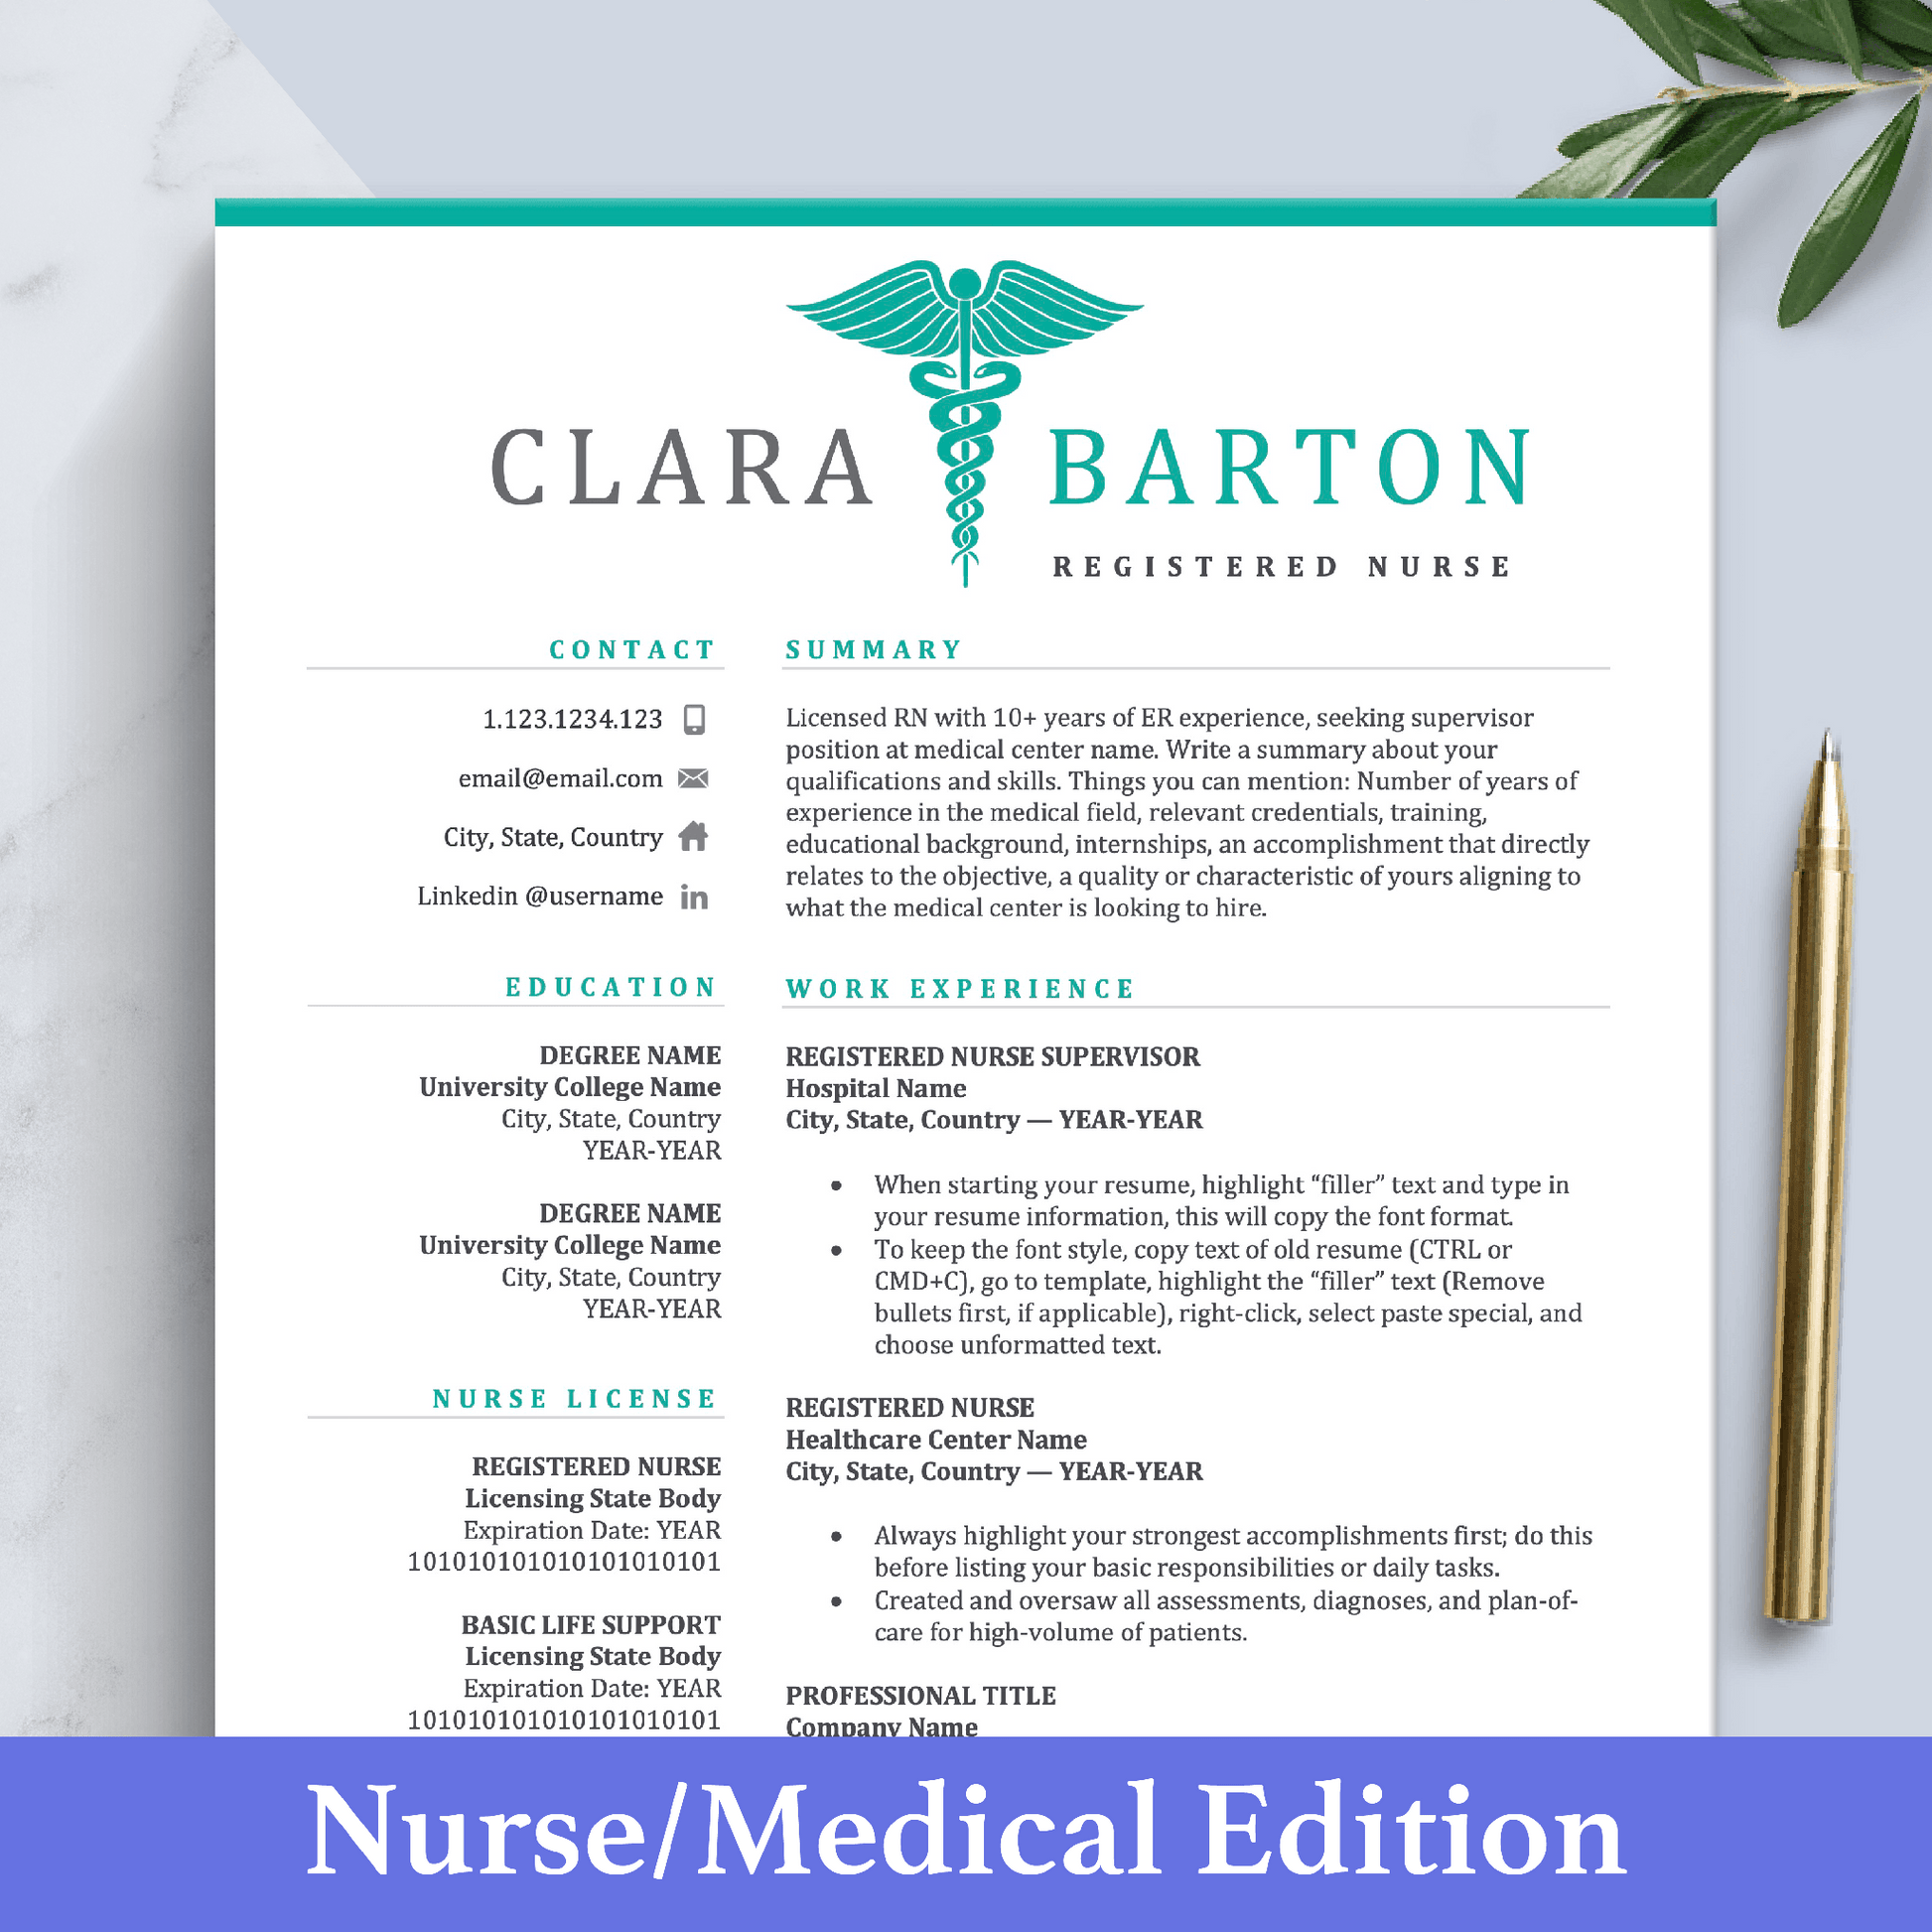 The Art of Resume Templates | Nurse Doctor Medical Resume CV Design Template Maker, Download for Apple Pages and Microsoft Word, Mac and PC Resume CV Template | Curriculum Vitae for Apple Pages, Microsoft Word, Mac, PC